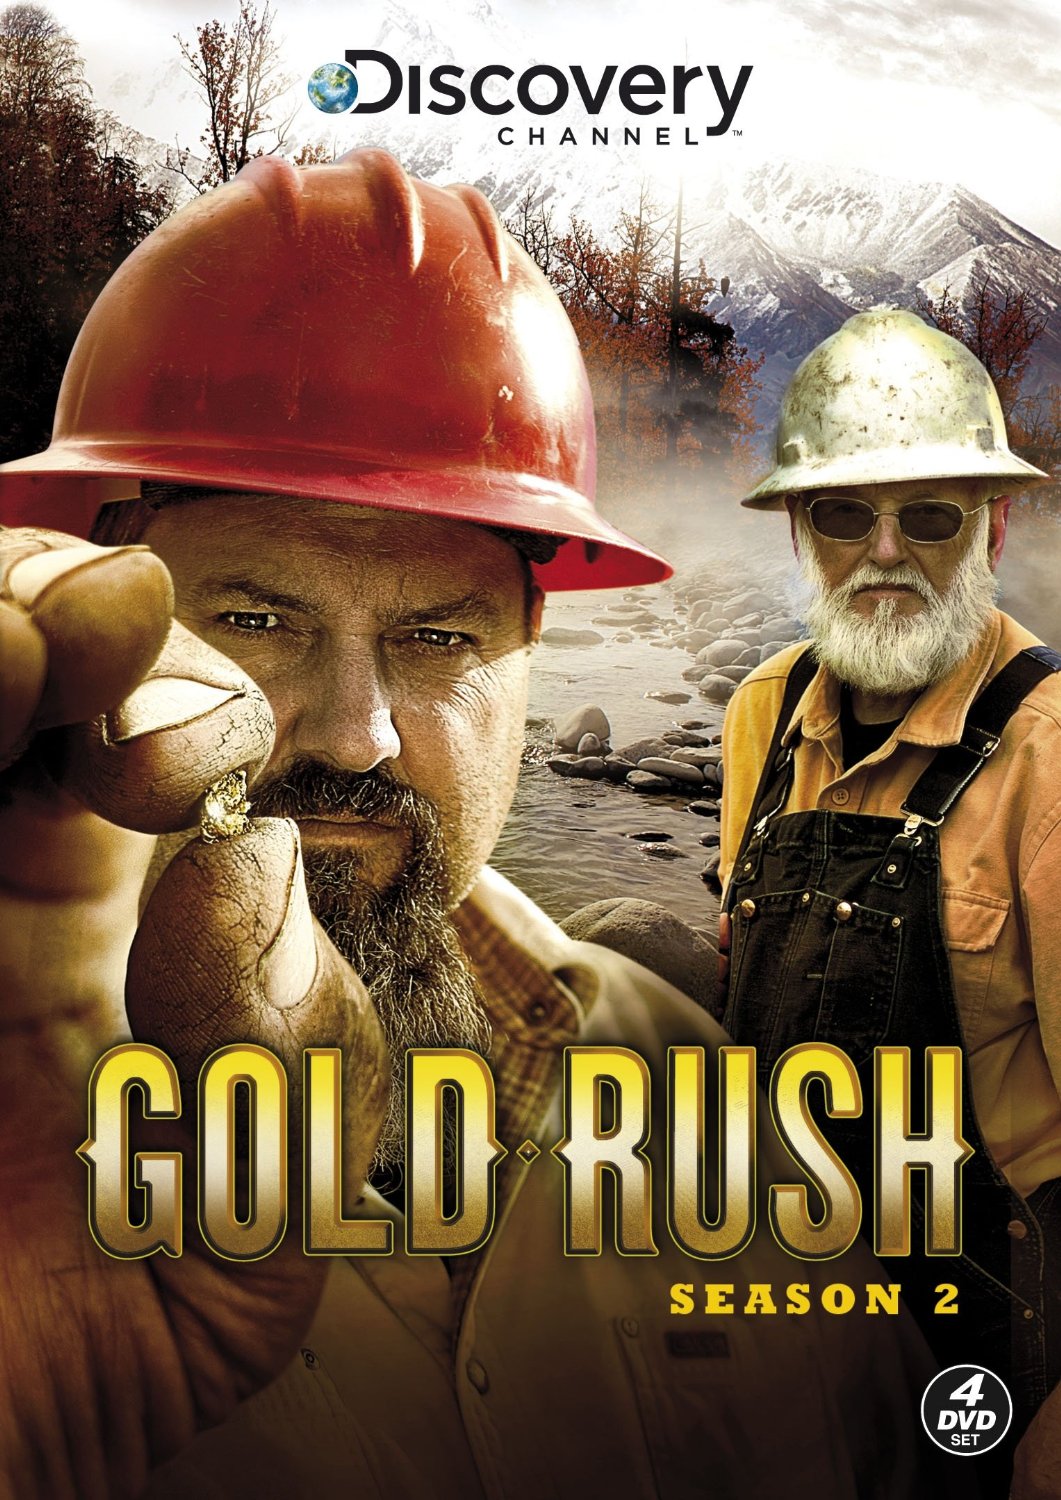 Where Can I Watch Gold Rush Online